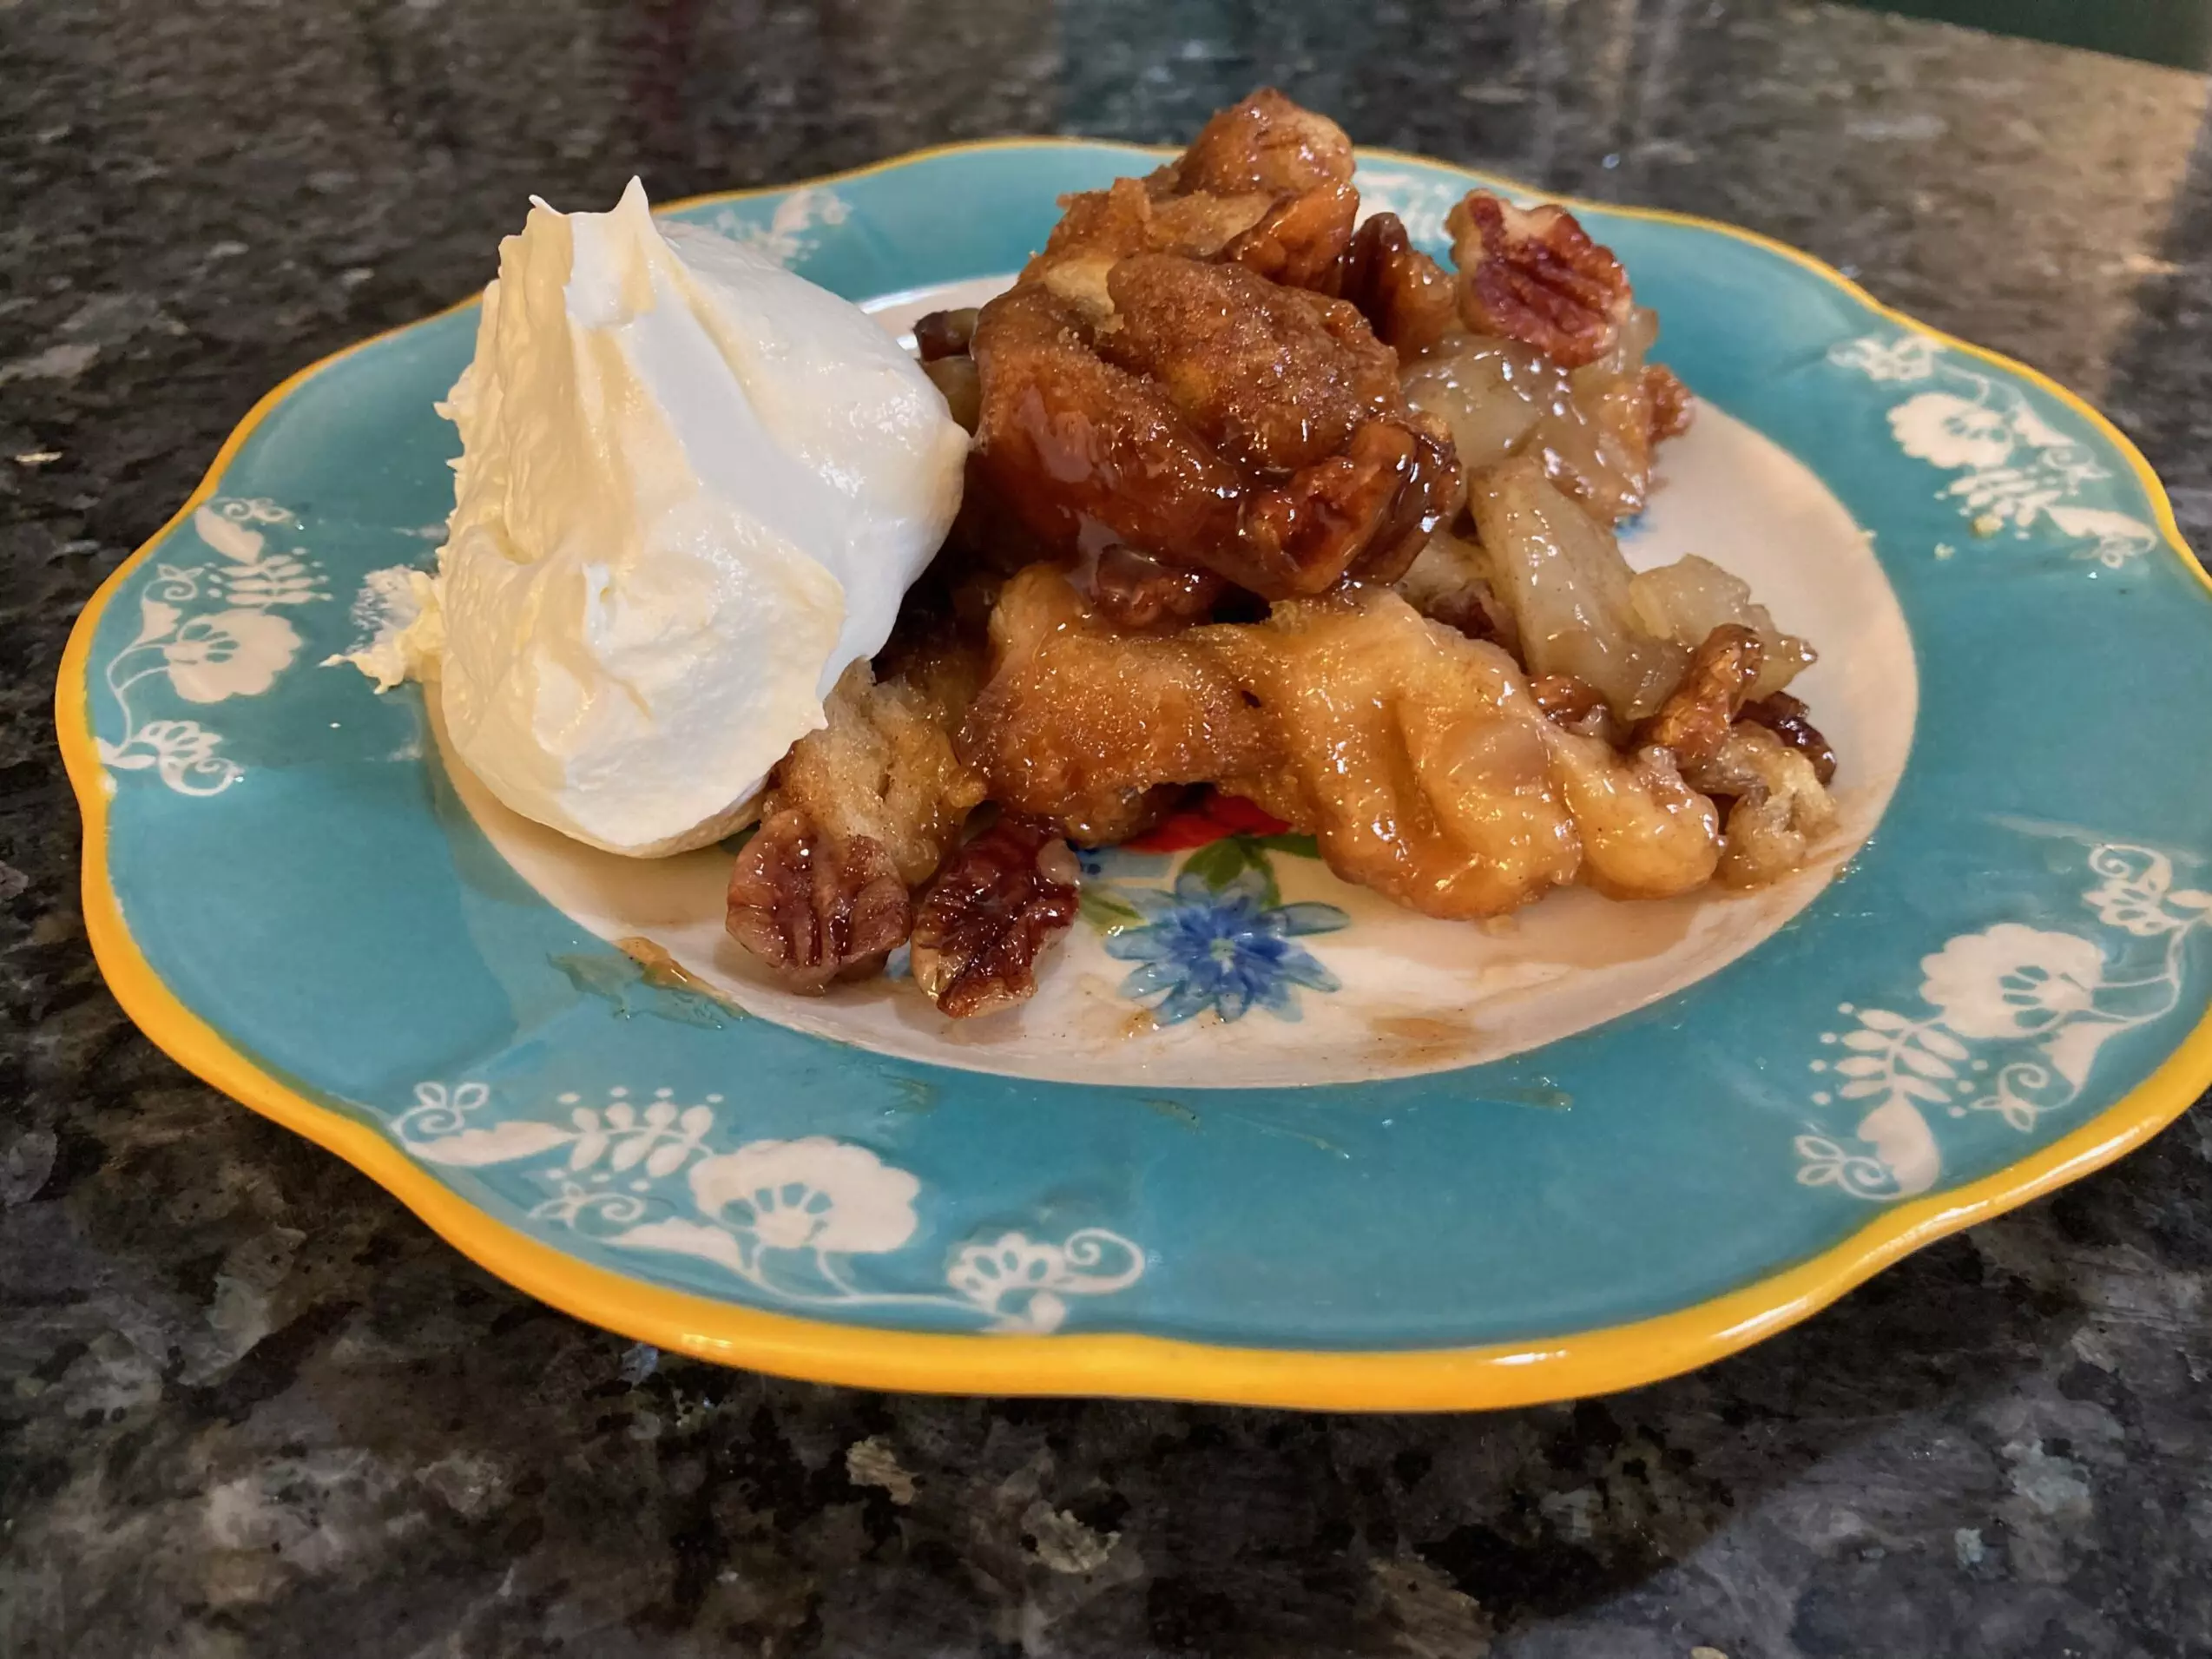 Scoop of Apple Pie Cobbler with Whipped Cream  from Out of the Box Baking.com